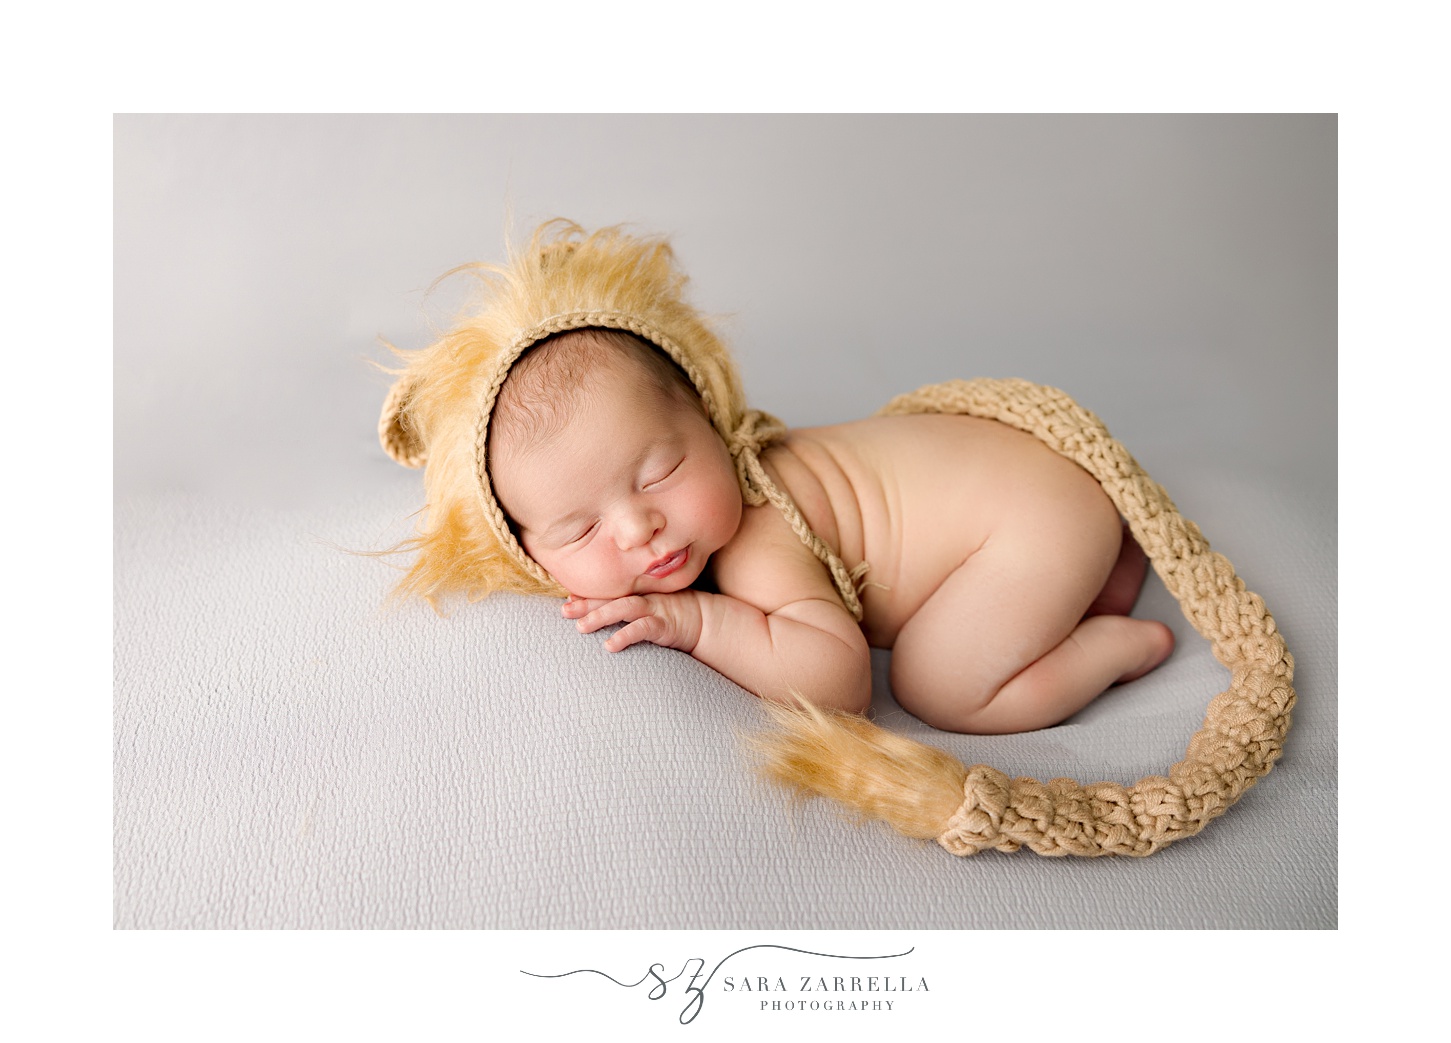 baby in lion outfit lays on grey blanket during newborn session with Rhode Island newborn and family photographer Sara Zarrella Photography